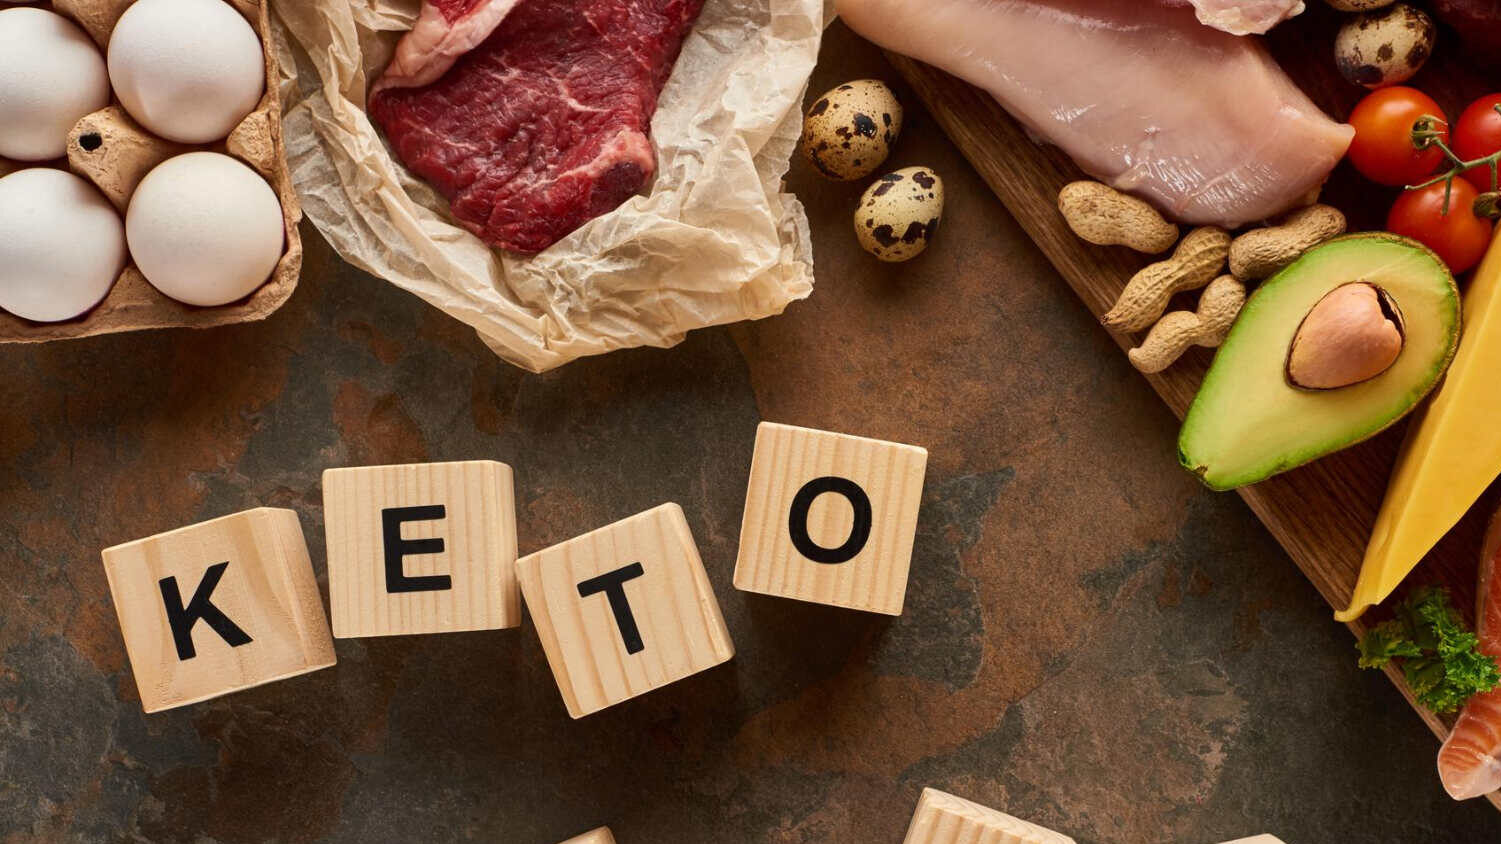 comprehensive guide to the Keto diet